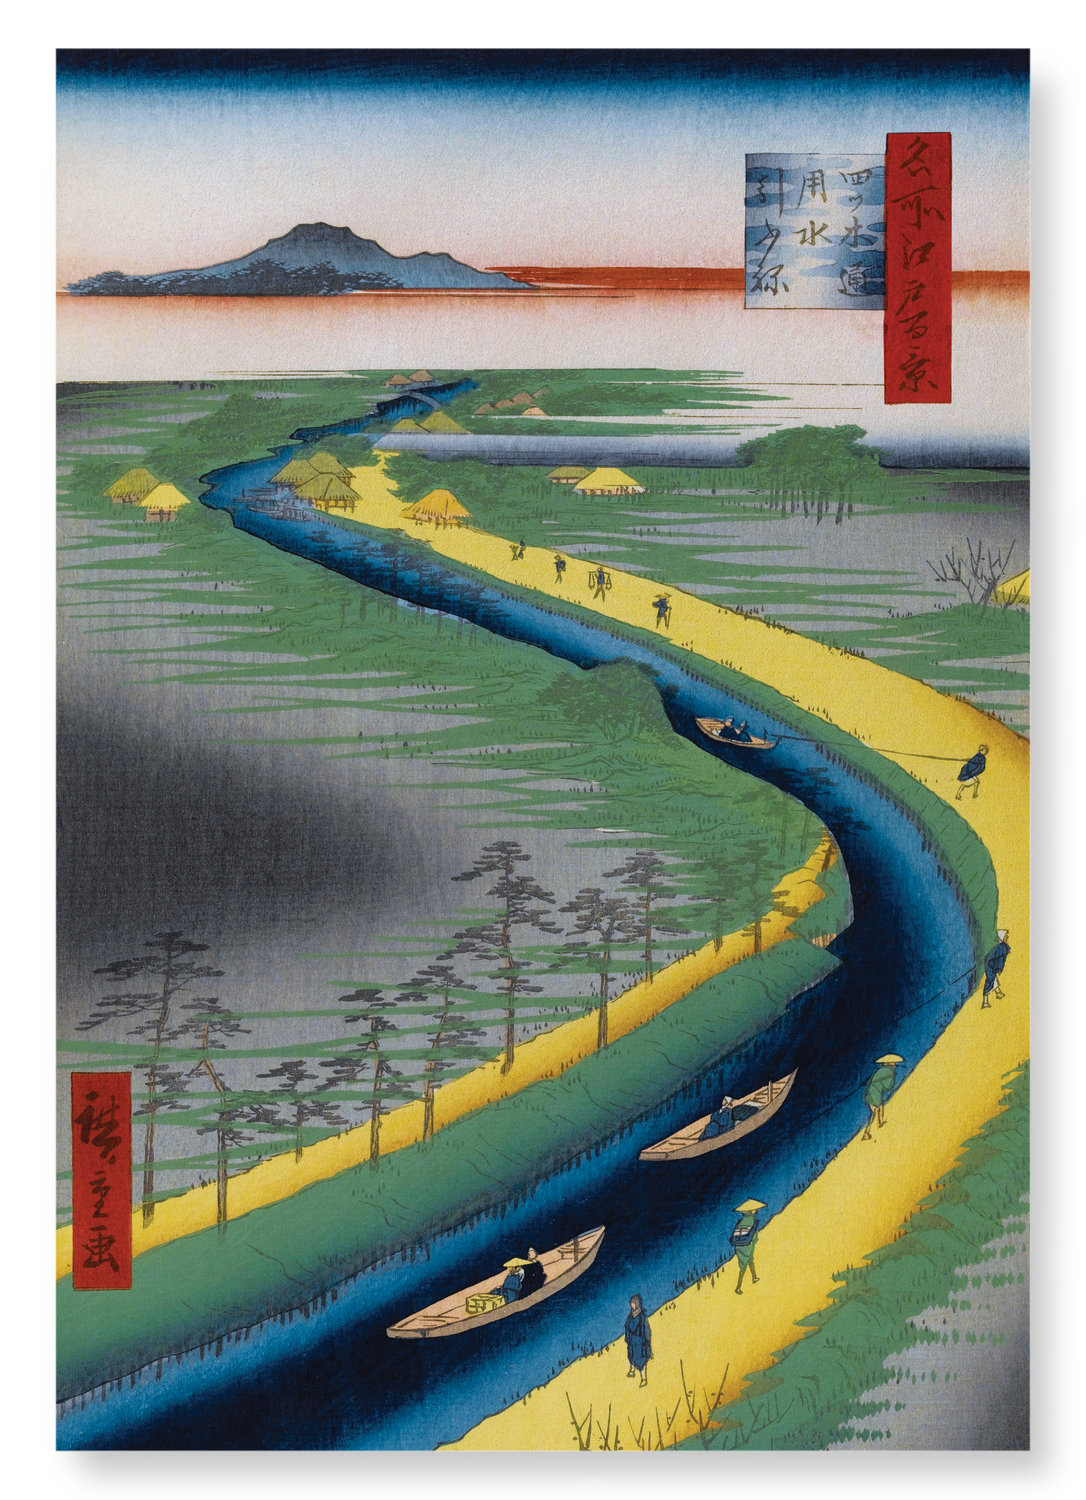 TOWBOATS ALONG THE CANAL (1857): Japanese Art Print